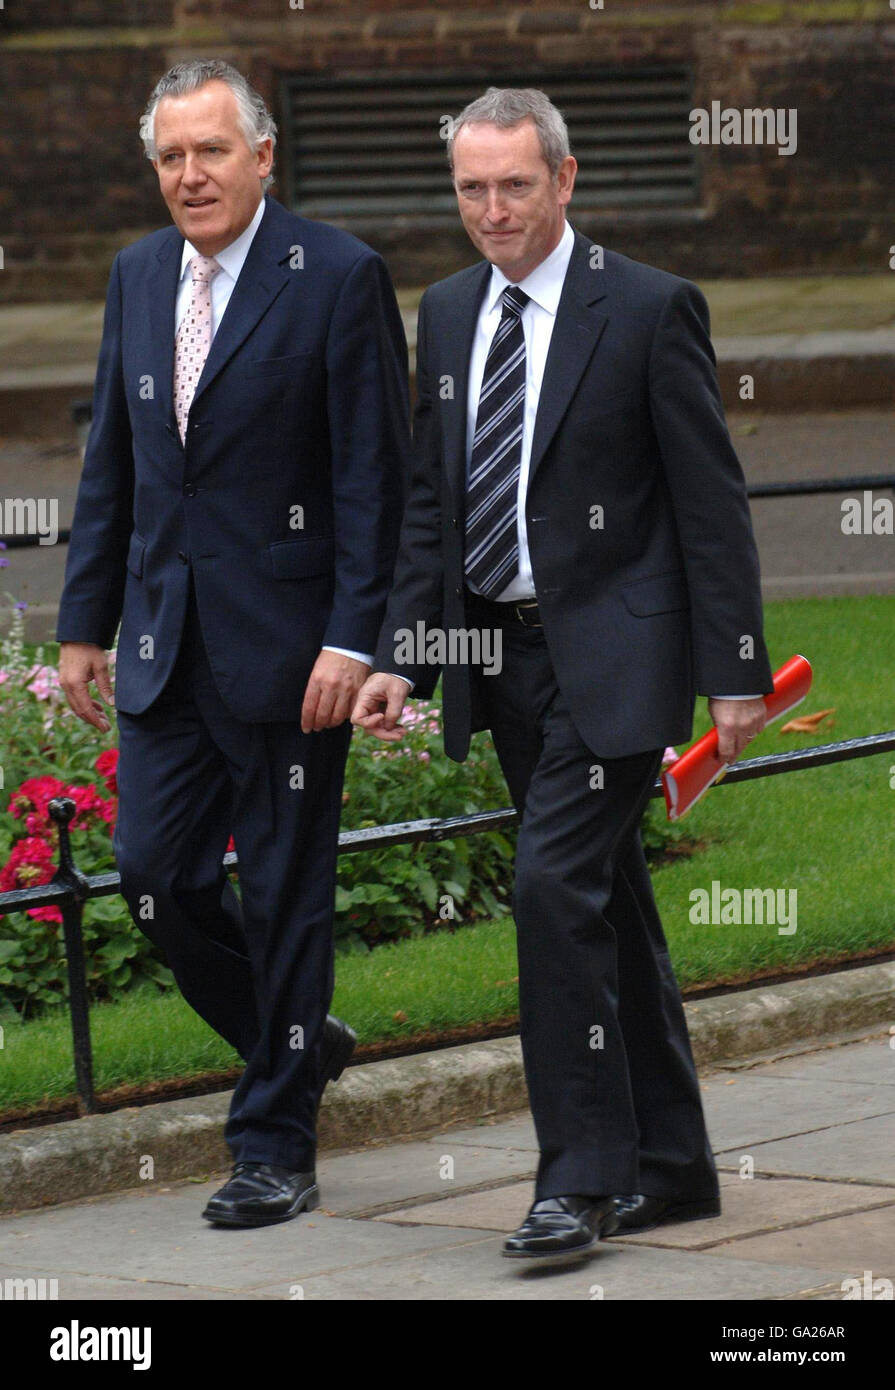 Work and Pensions Secretary Peter Hain and Secretary of State for Business, Enterprise and Regulatory Reform John Hutton in Downing Street, London, arriving for their first cabinet meeting with Prime Minister Gordon Brown. Stock Photo